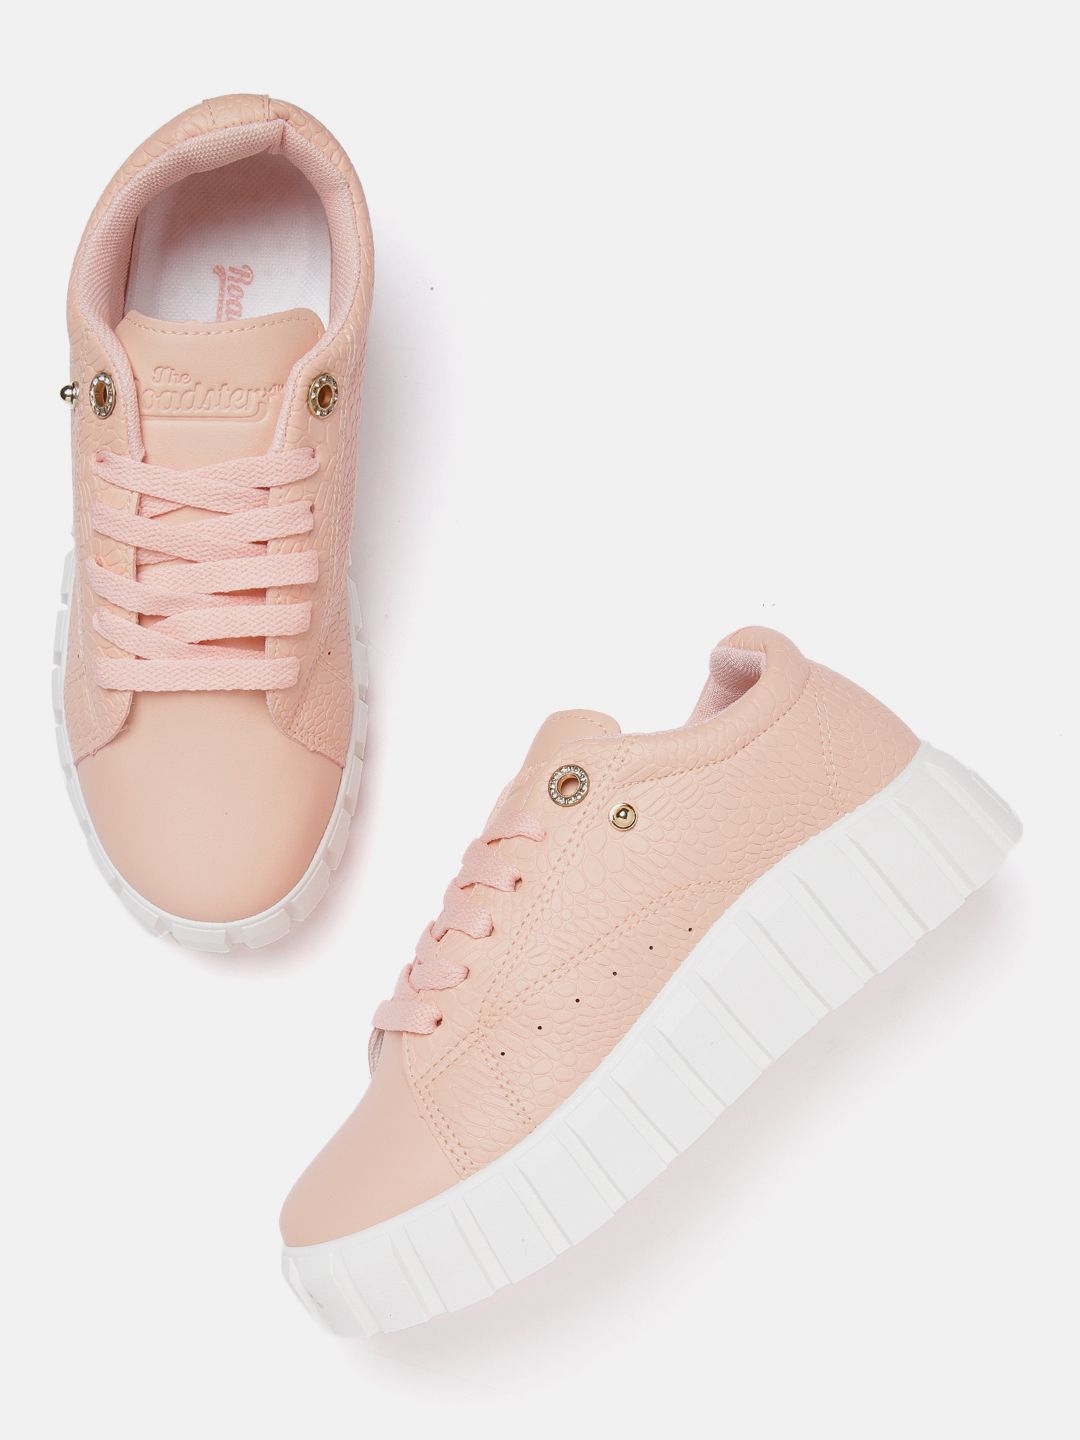 Roadster Women Peach-Coloured Textured Sneakers Price in India